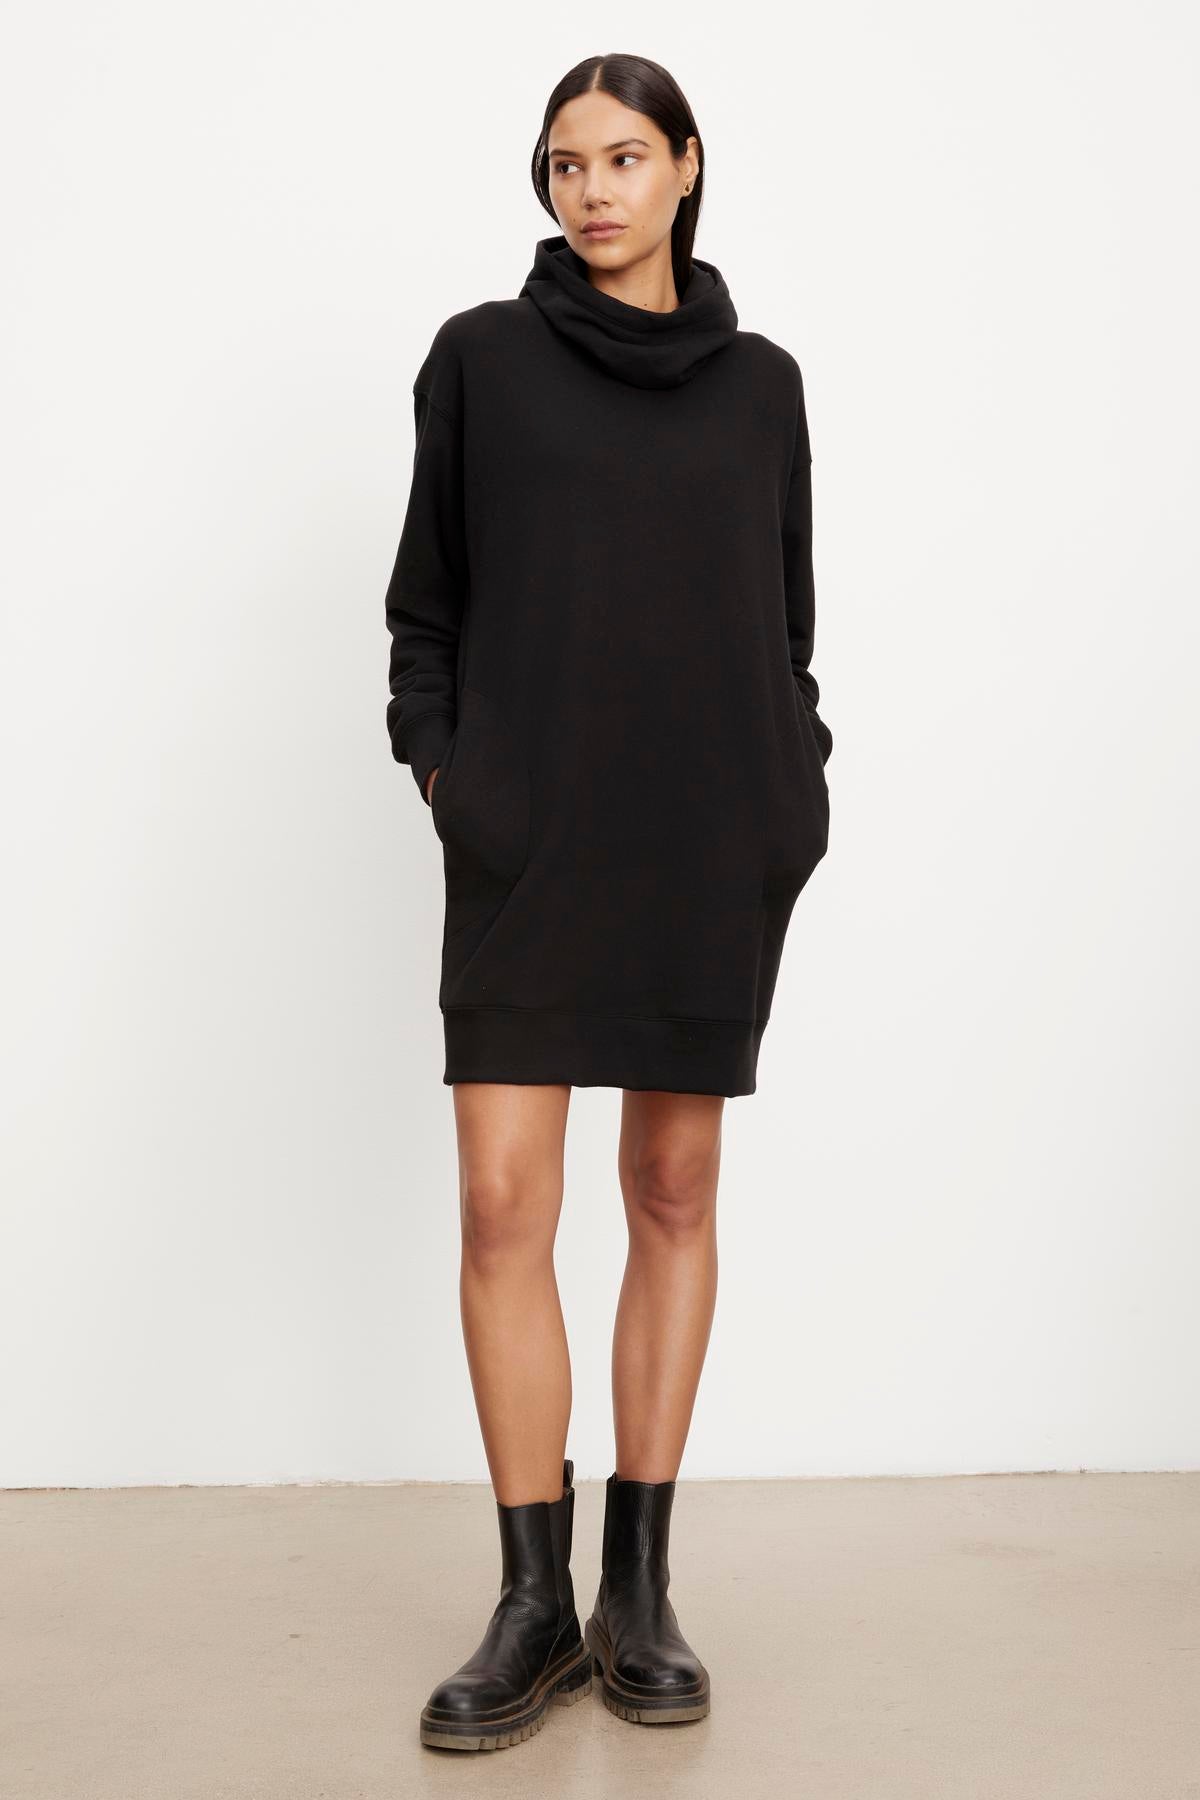 A woman in a YARA SOFT FLEECE HOODIE DRESS by Velvet by Graham & Spencer and black boots standing against a plain background.-35696174366913